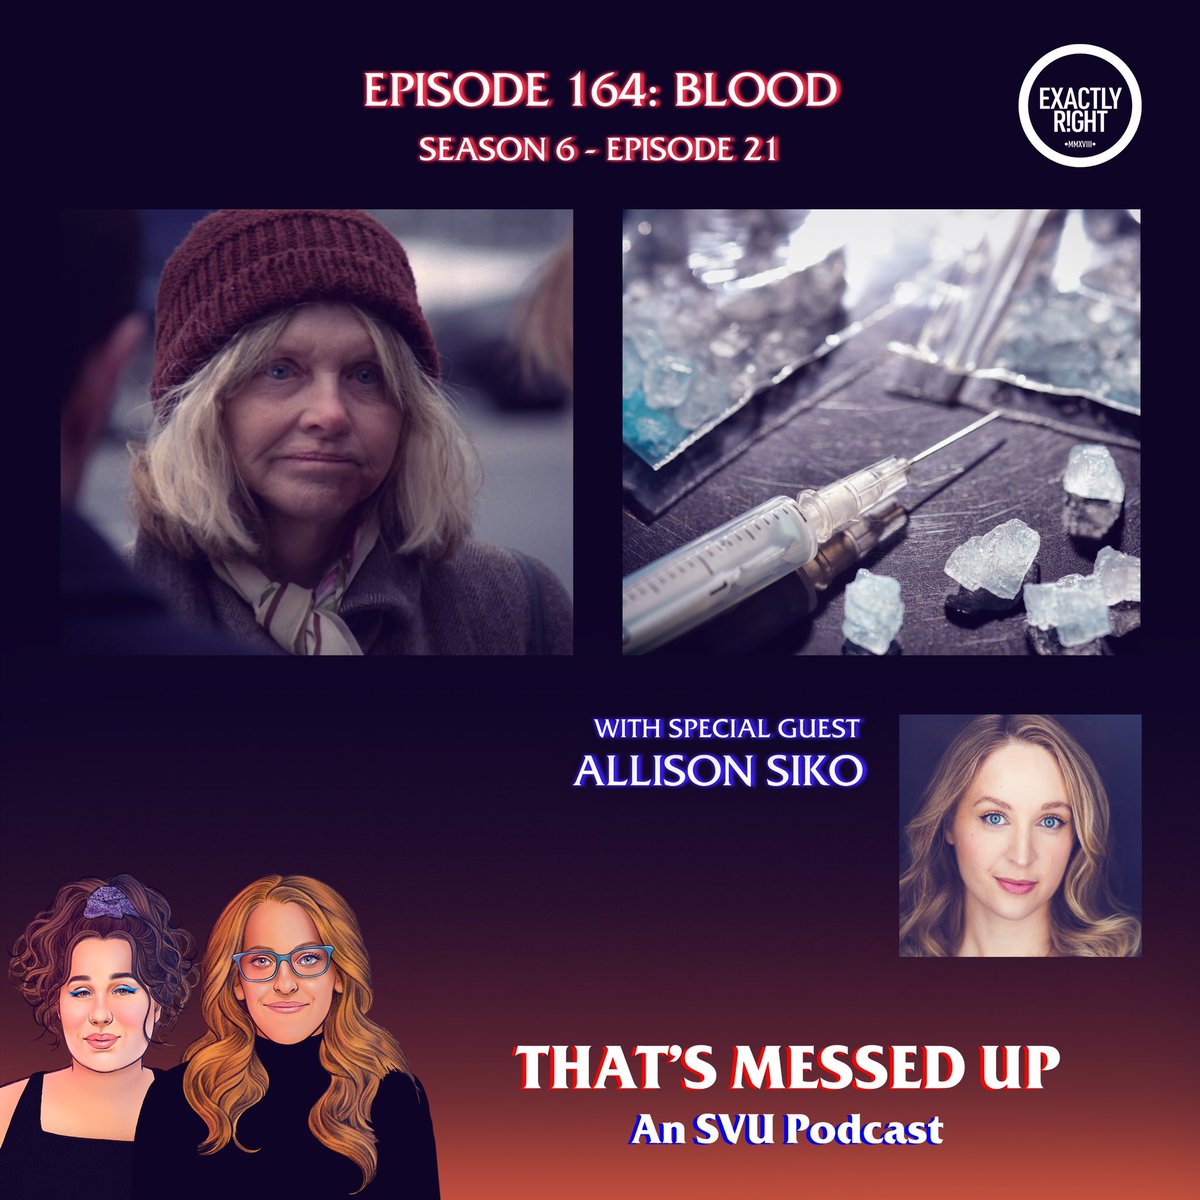 NEW EPISODE - Episode 164 “Blood” is up on @exactlyright! An ep where neither babies nor old ladies are safe! Plus we were so psyched to talk to Kathleen Stabler herself, @AllisonSiko! Llisten on @applepodcasts podcasts.apple.com/us/podcast/tha… @spotifypodcasts or wherever you pod!